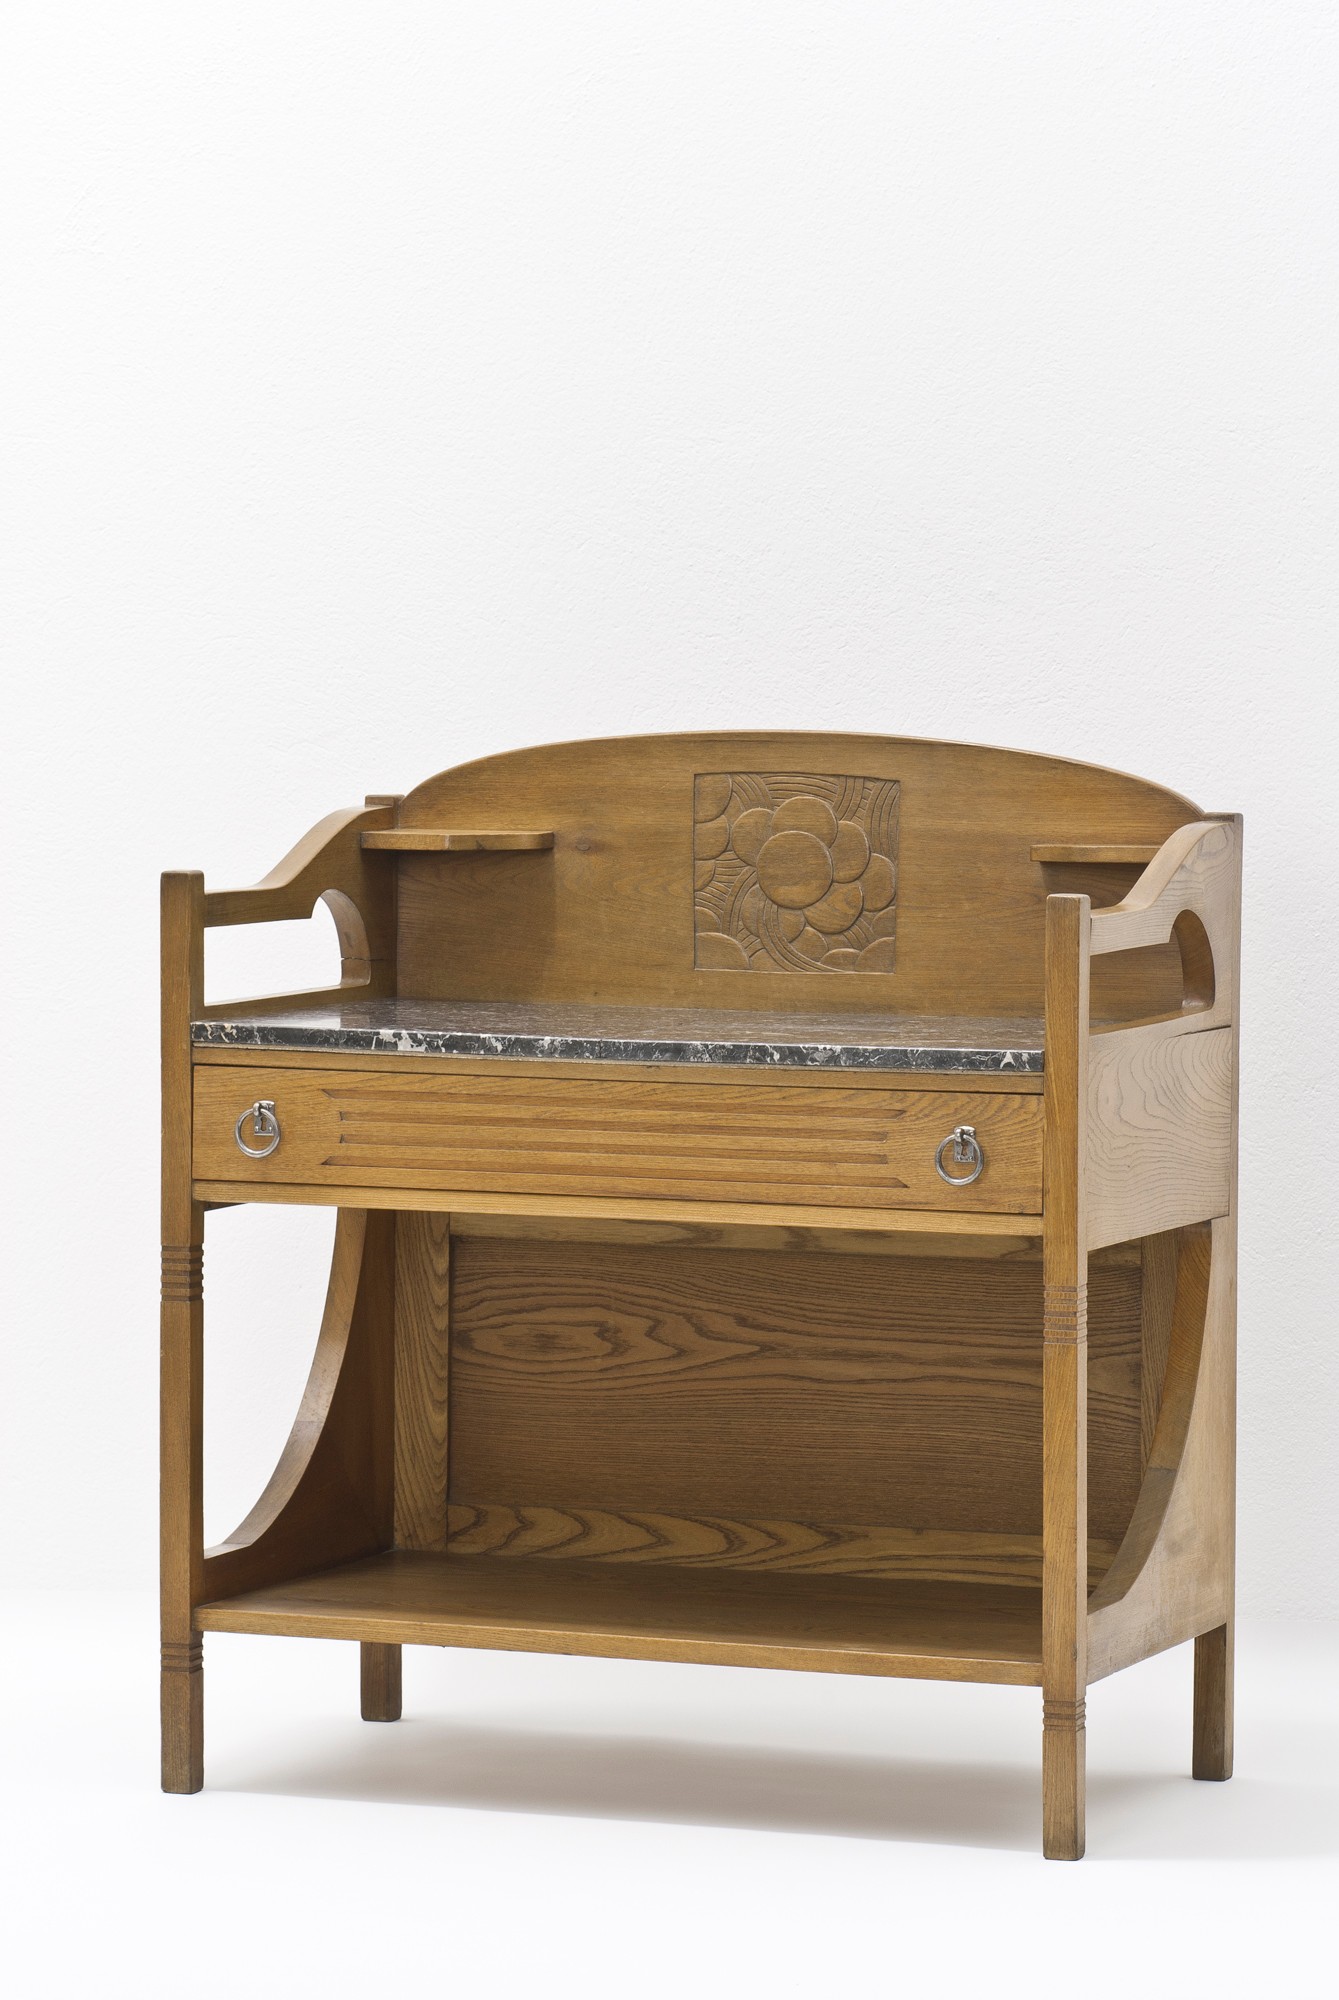 <BODY>Sigmund Jaray, WASHSTAND from the living room furnishings of a married worker</BODY>